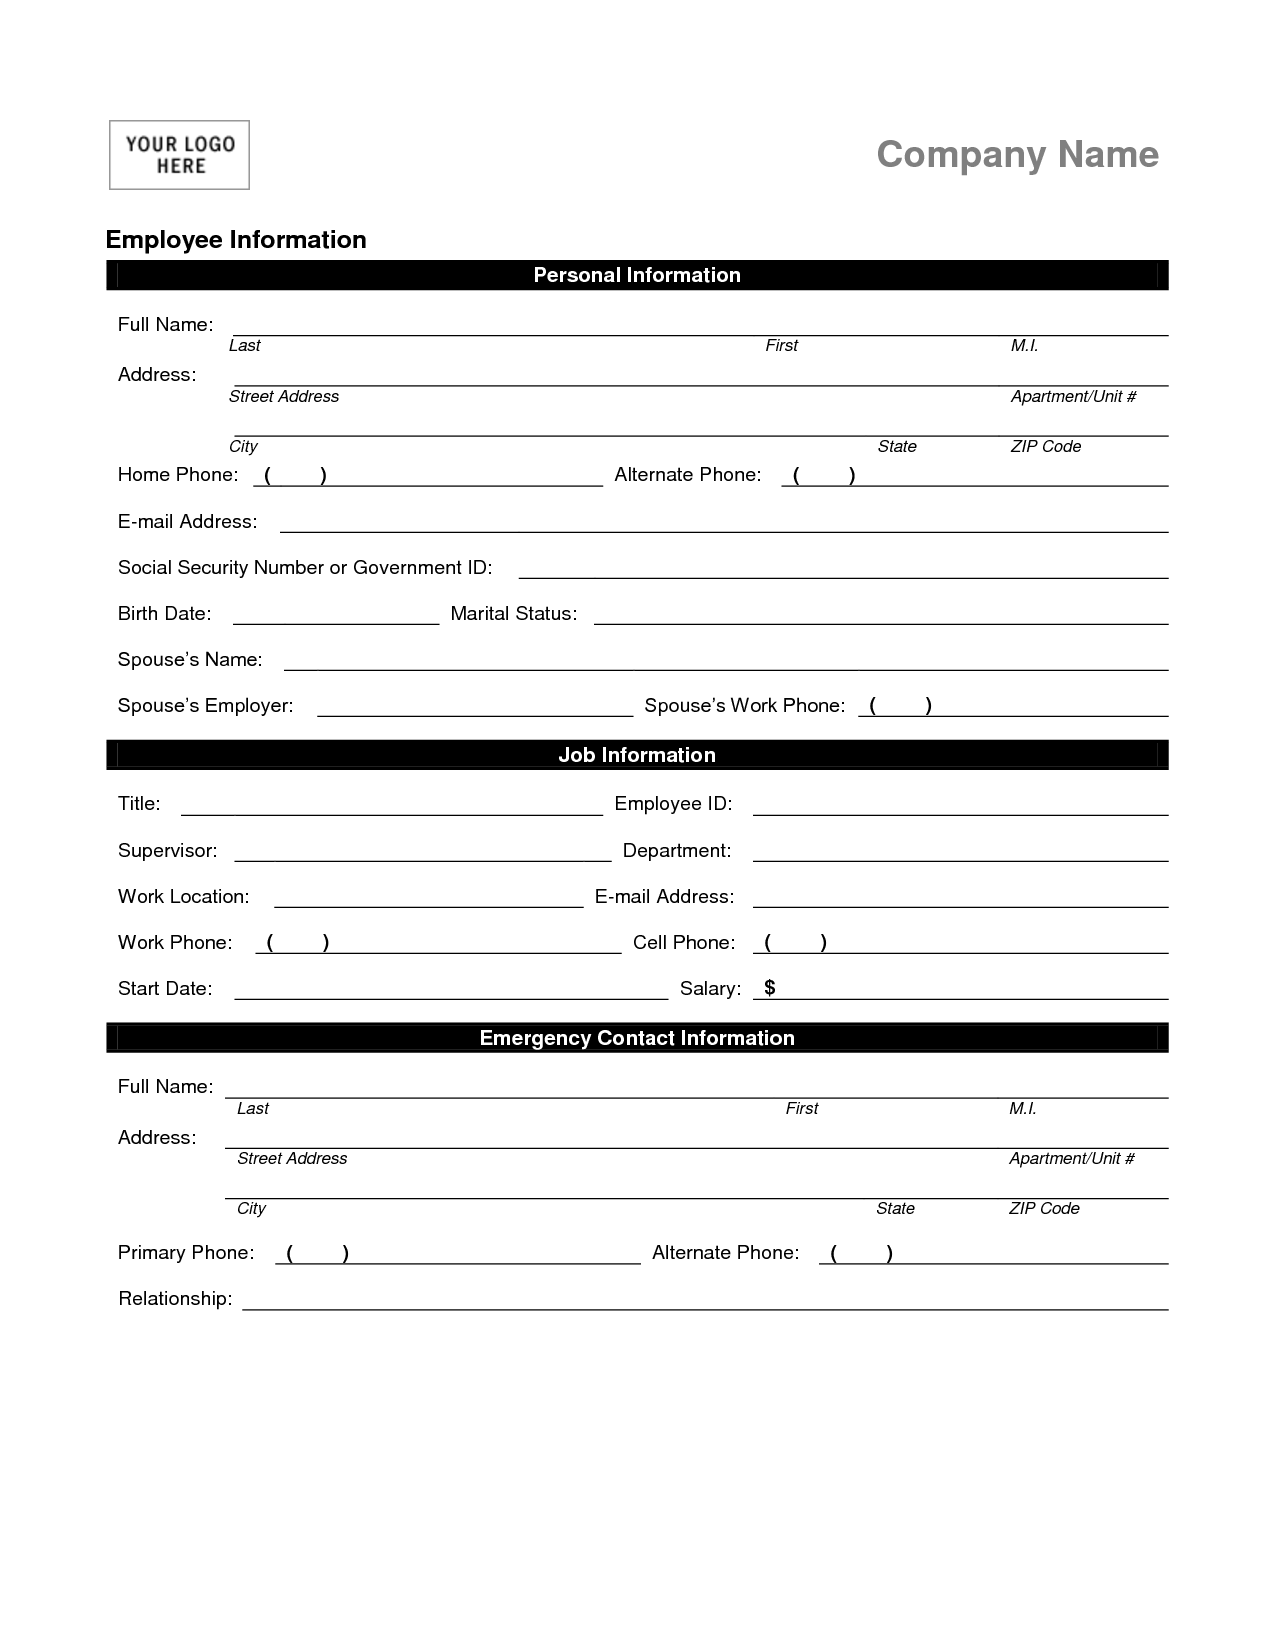 Employee Information Forms Templates | charlotte clergy ...